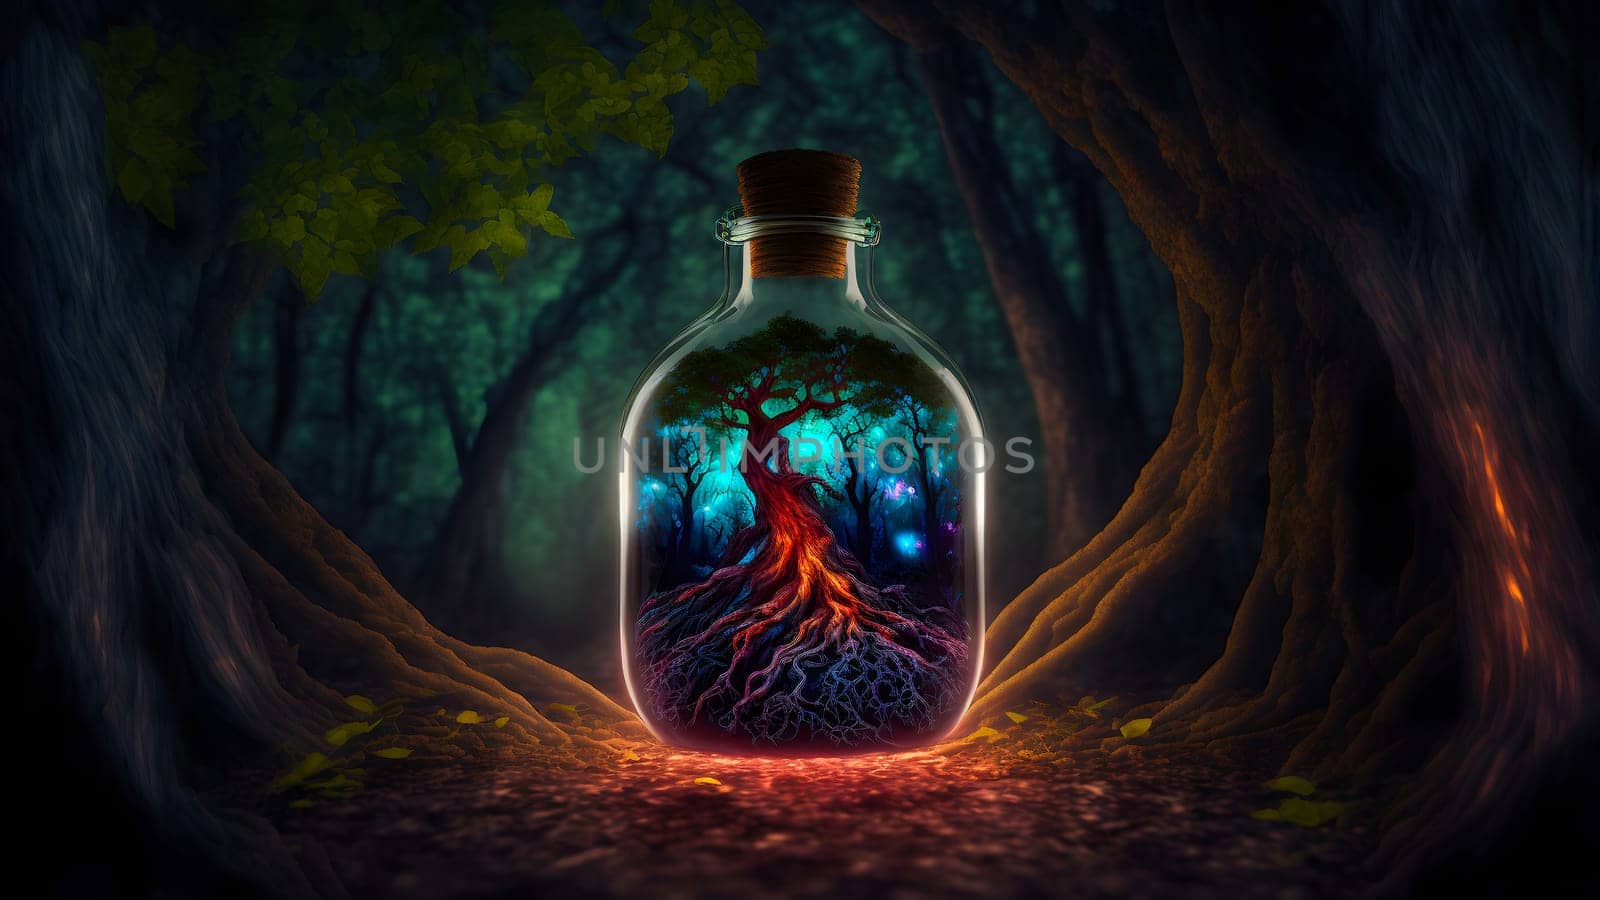 glowing potion bottle with magic tree inside on night forest ground, neural network generated art. Digitally generated image. Not based on any actual person, scene or pattern.